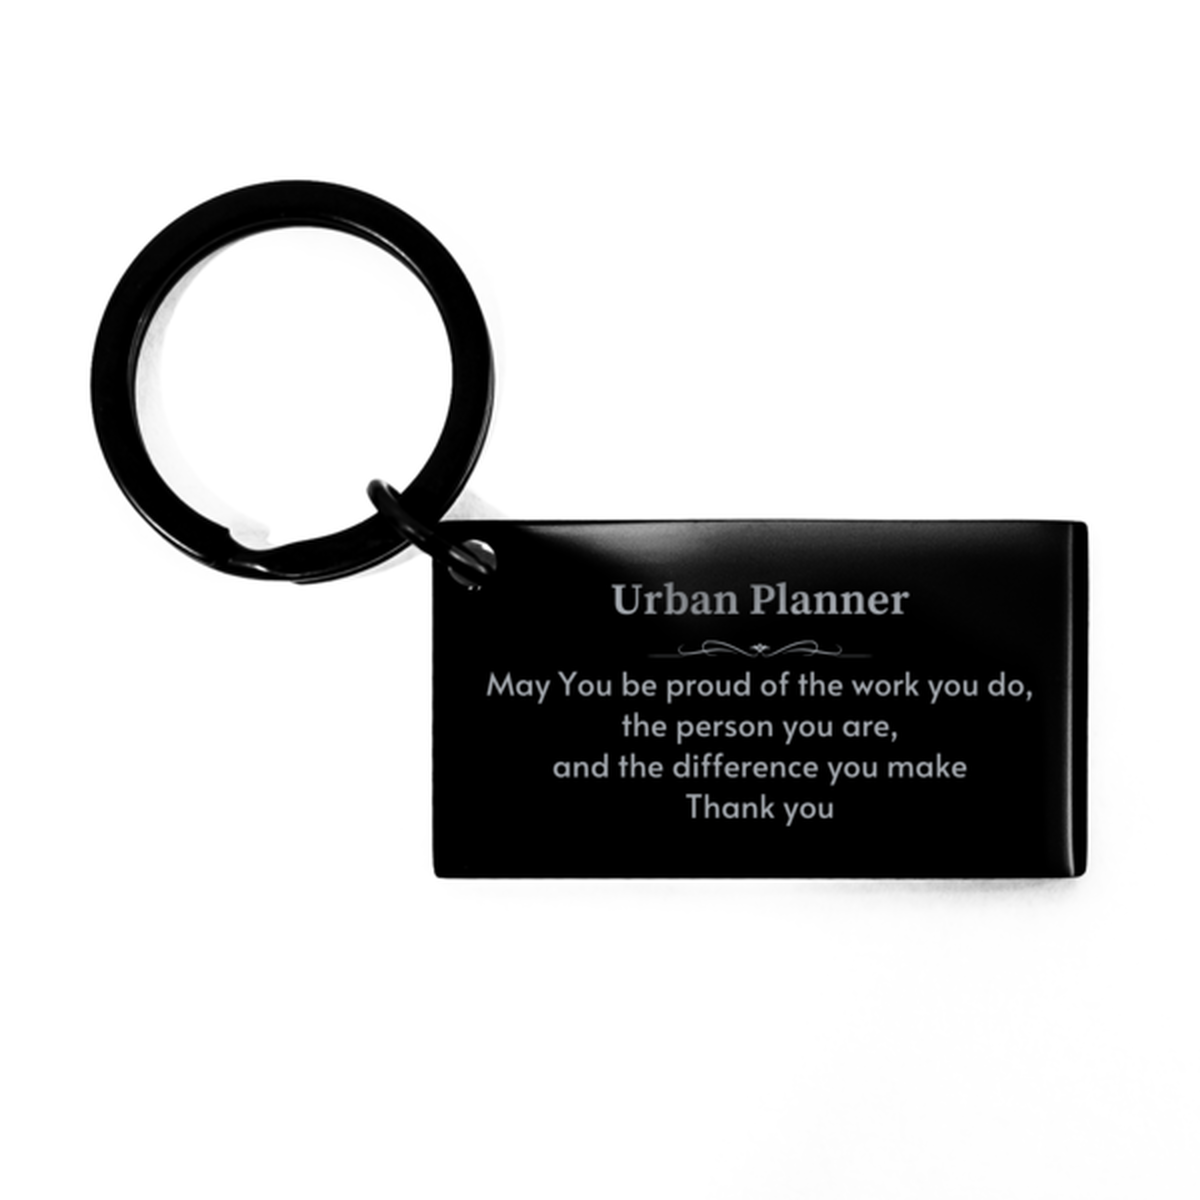 Heartwarming Keychain Retirement Coworkers Gifts for Urban Planner, Aerospace Engineer May You be proud of the work you do, the person you are Gifts for Boss Men Women Friends